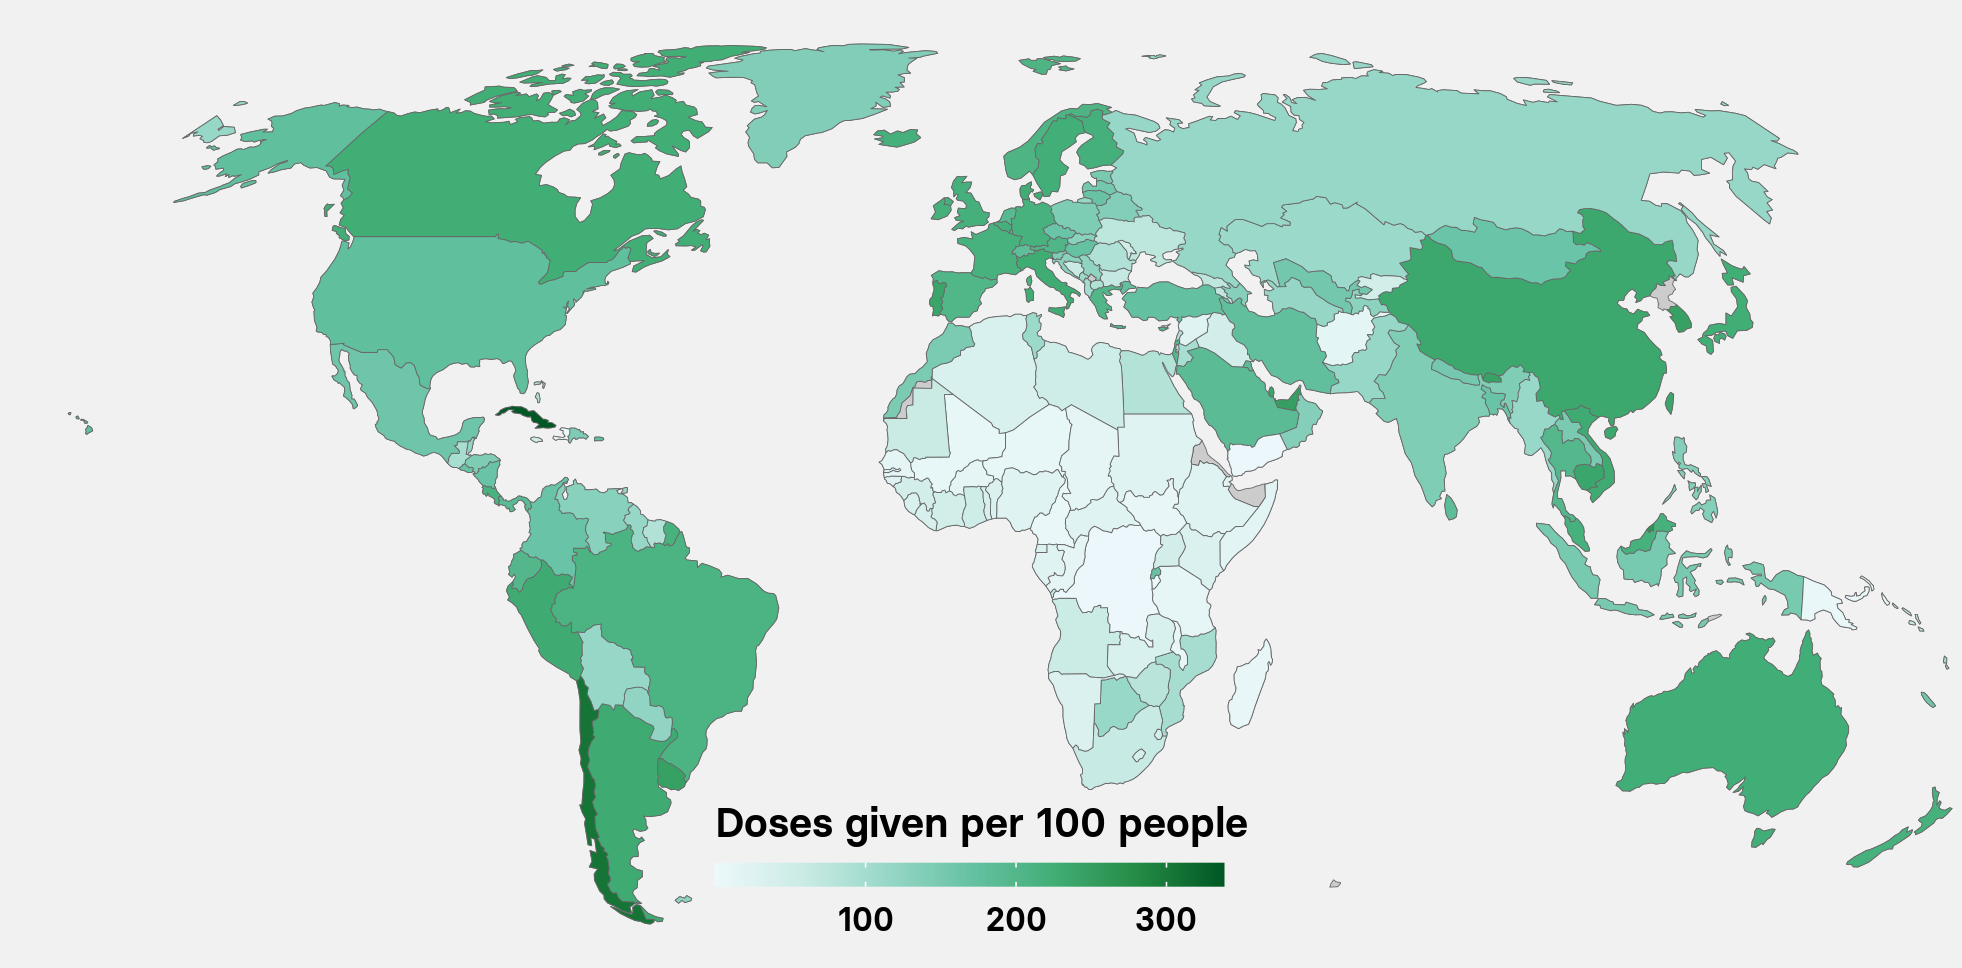 Vaccination rate per 100 people world wide